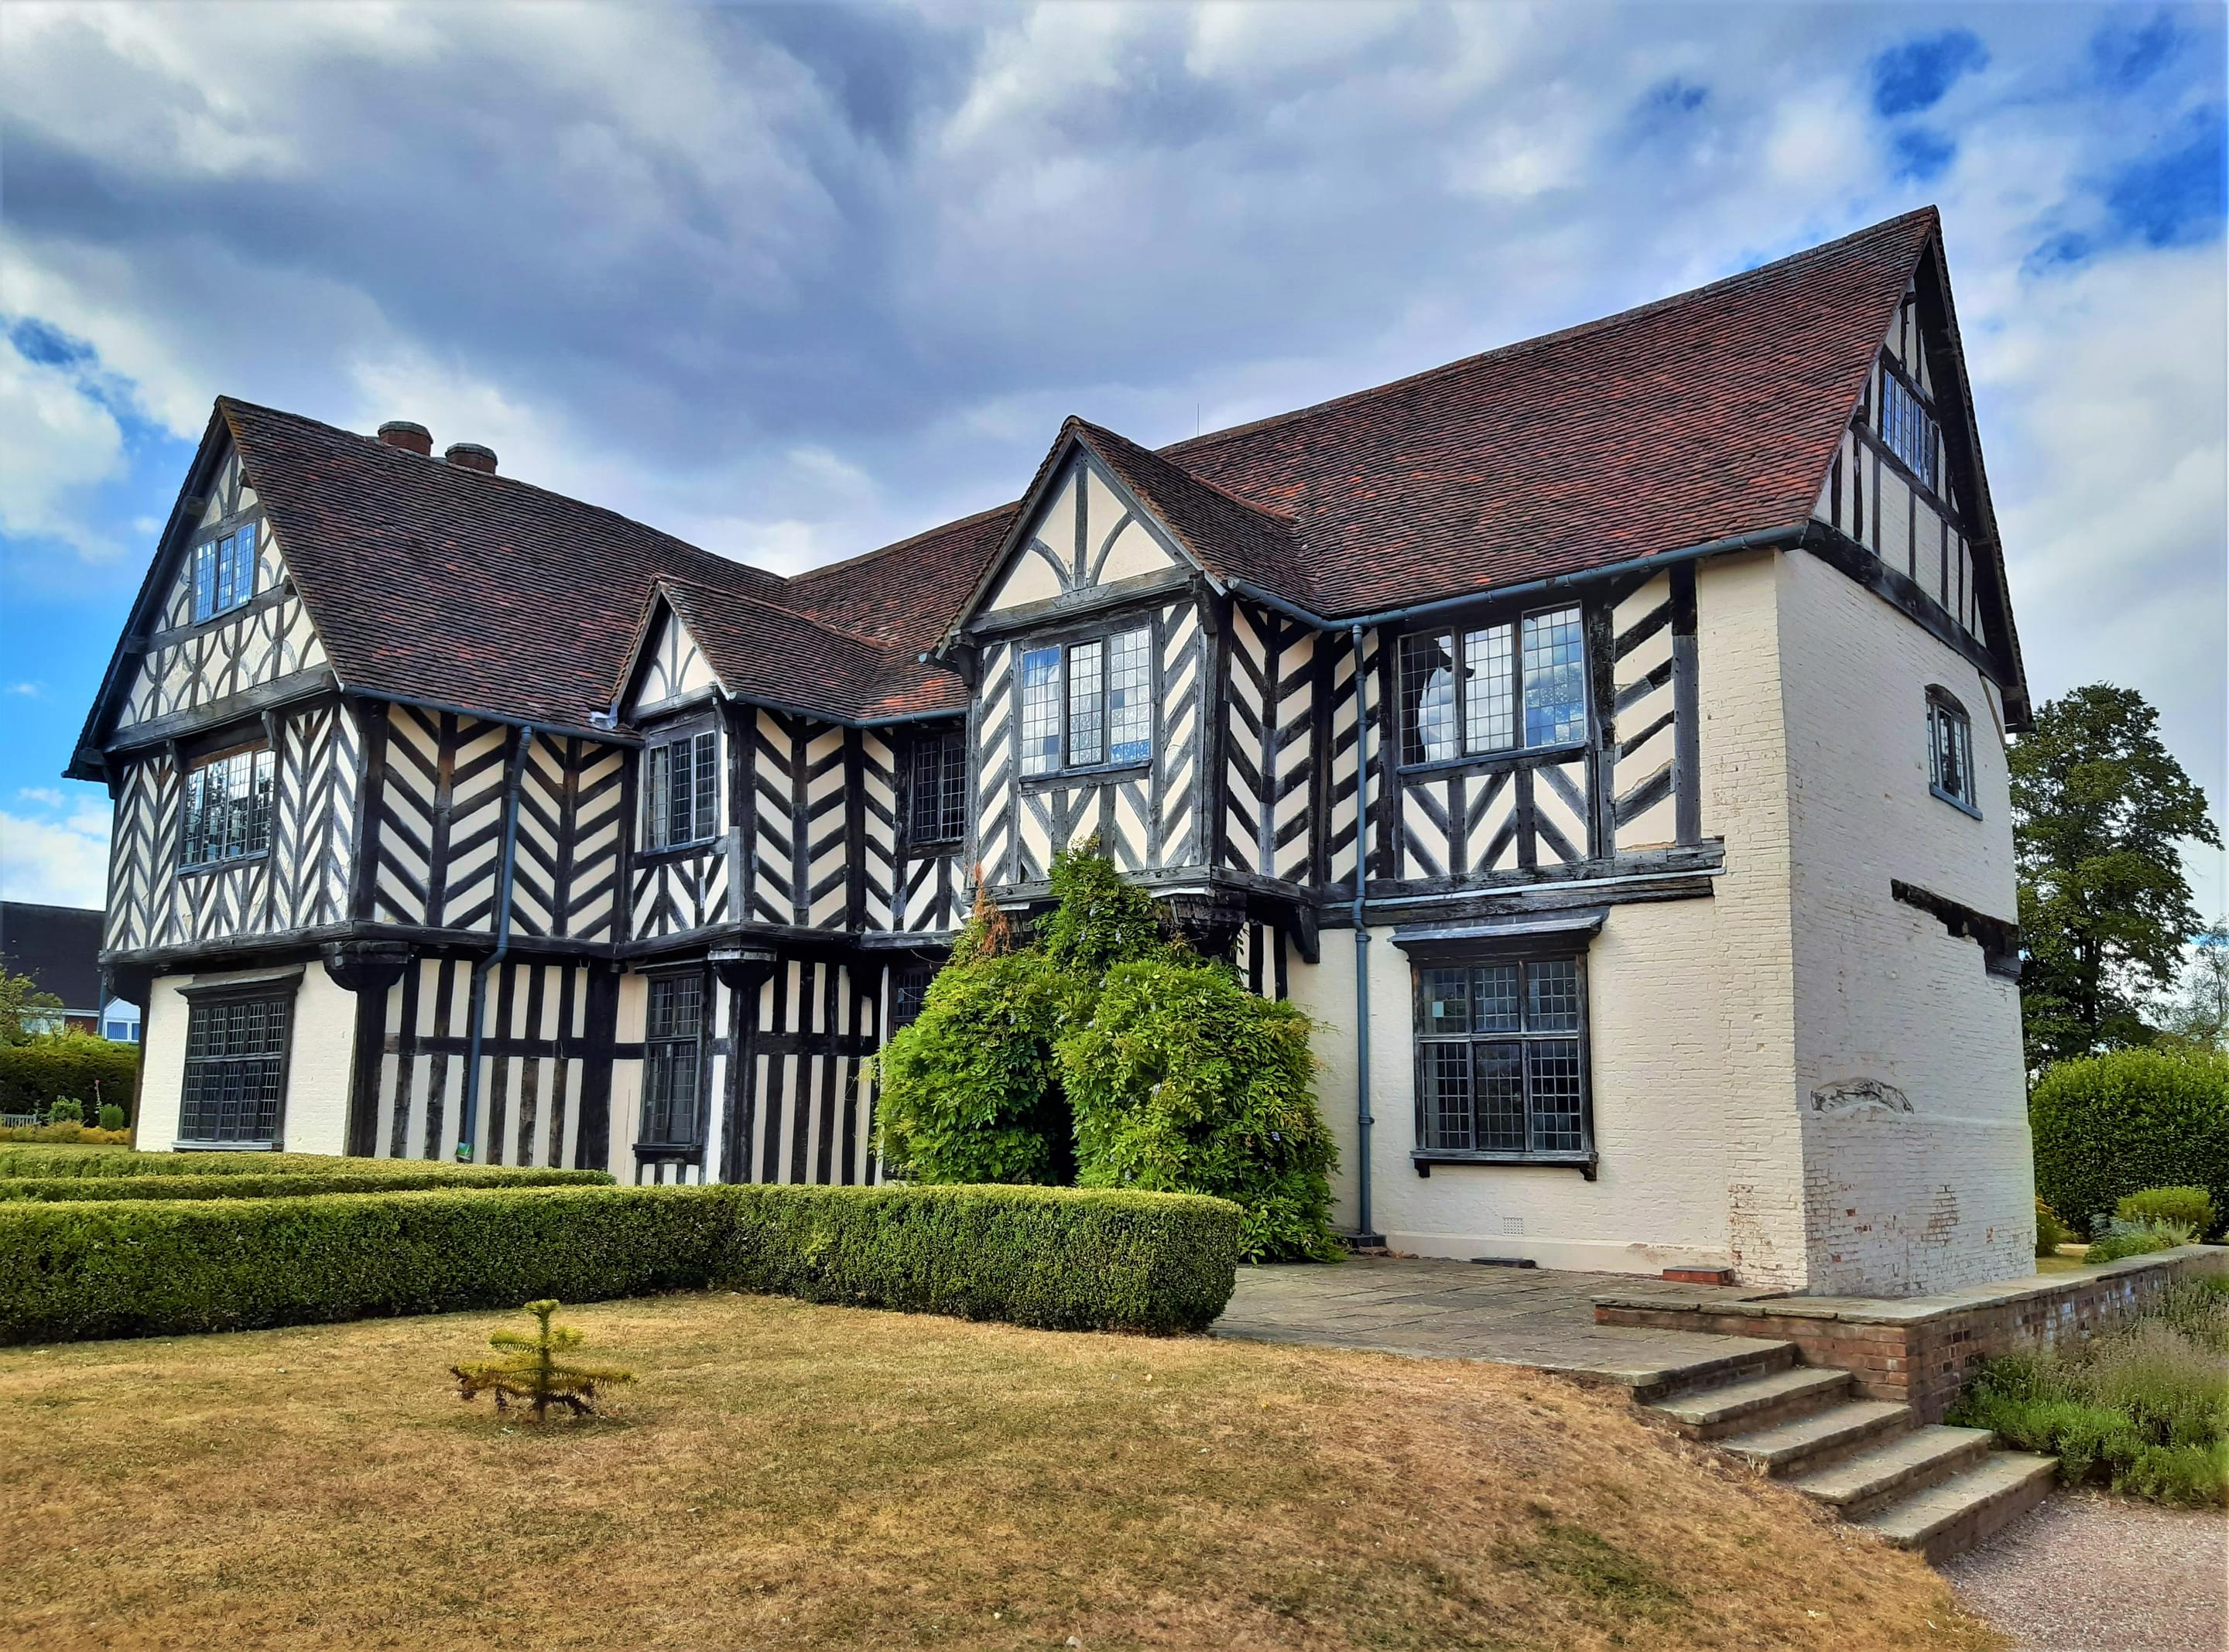 Blakesley Hall Overview